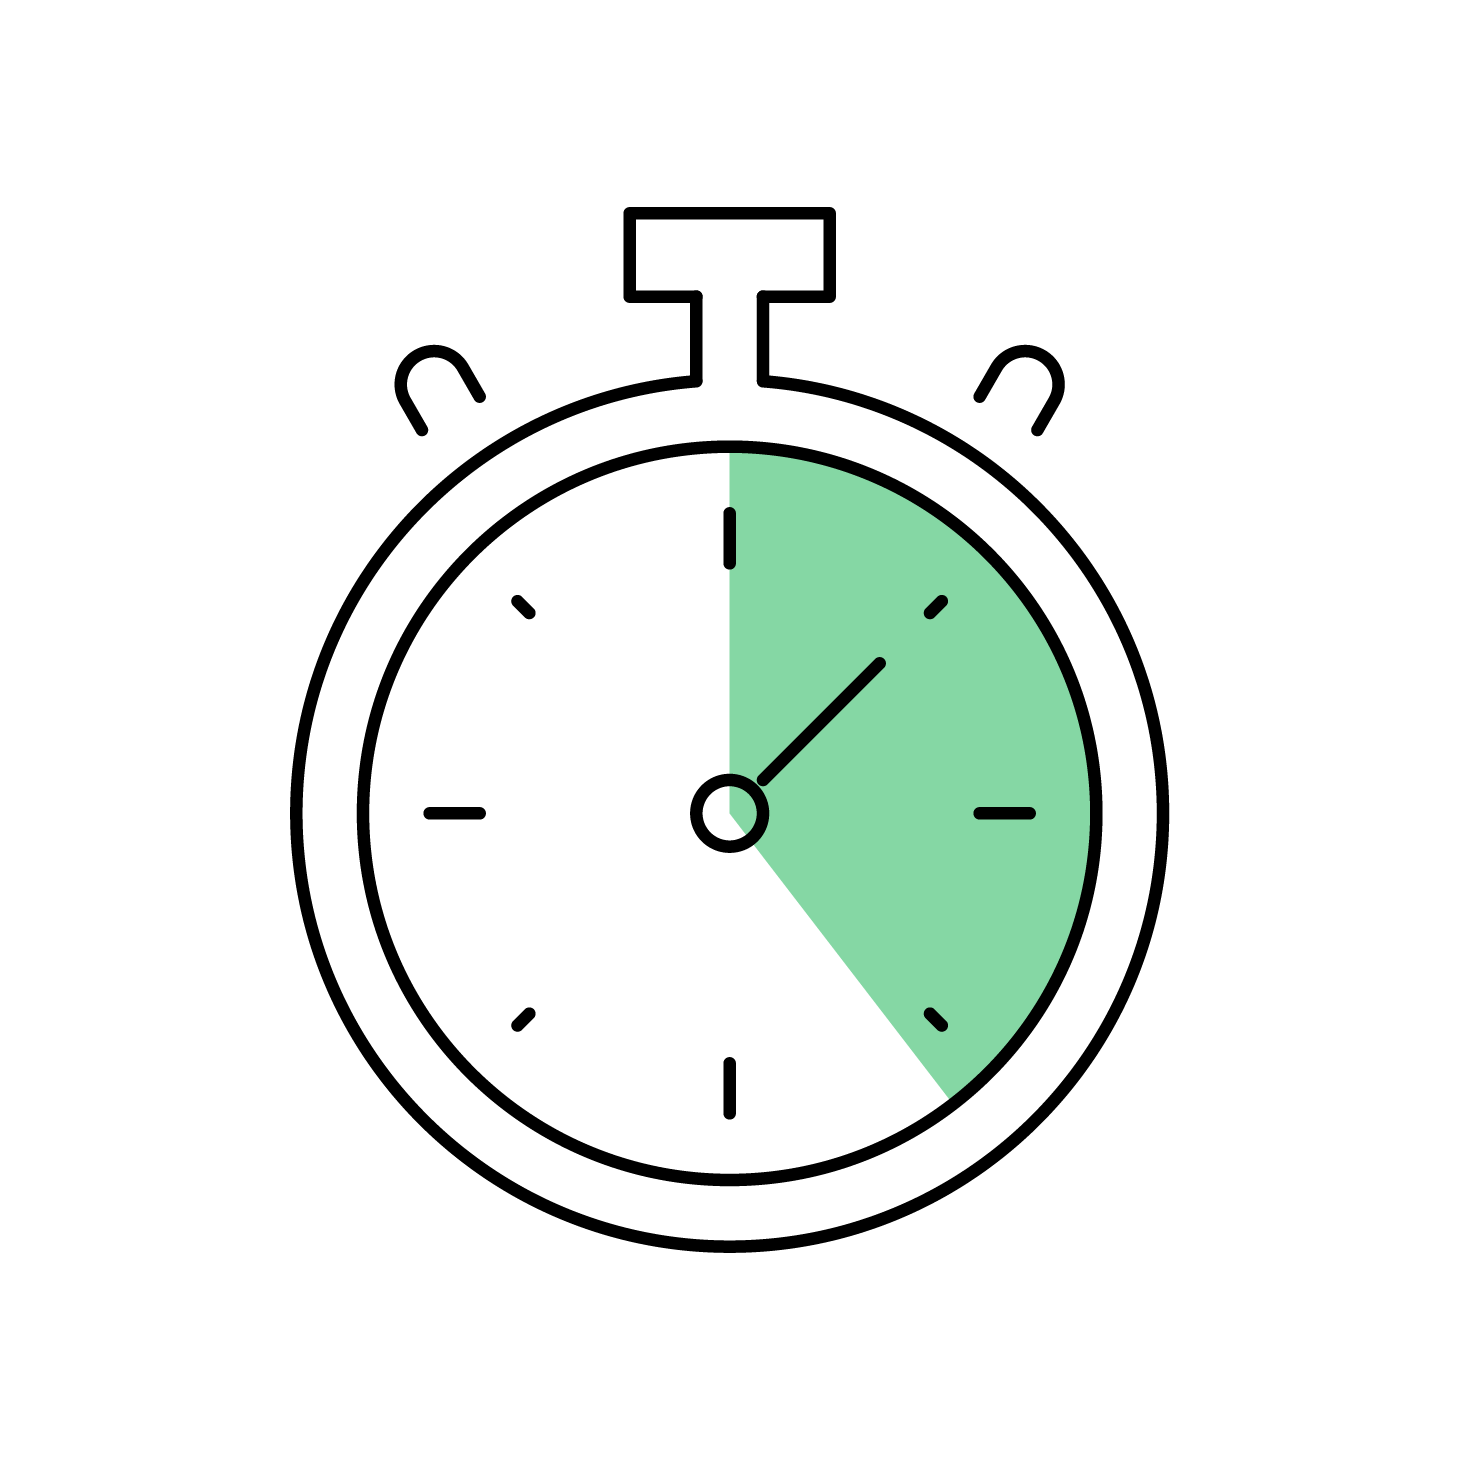 Image of a stopwatch